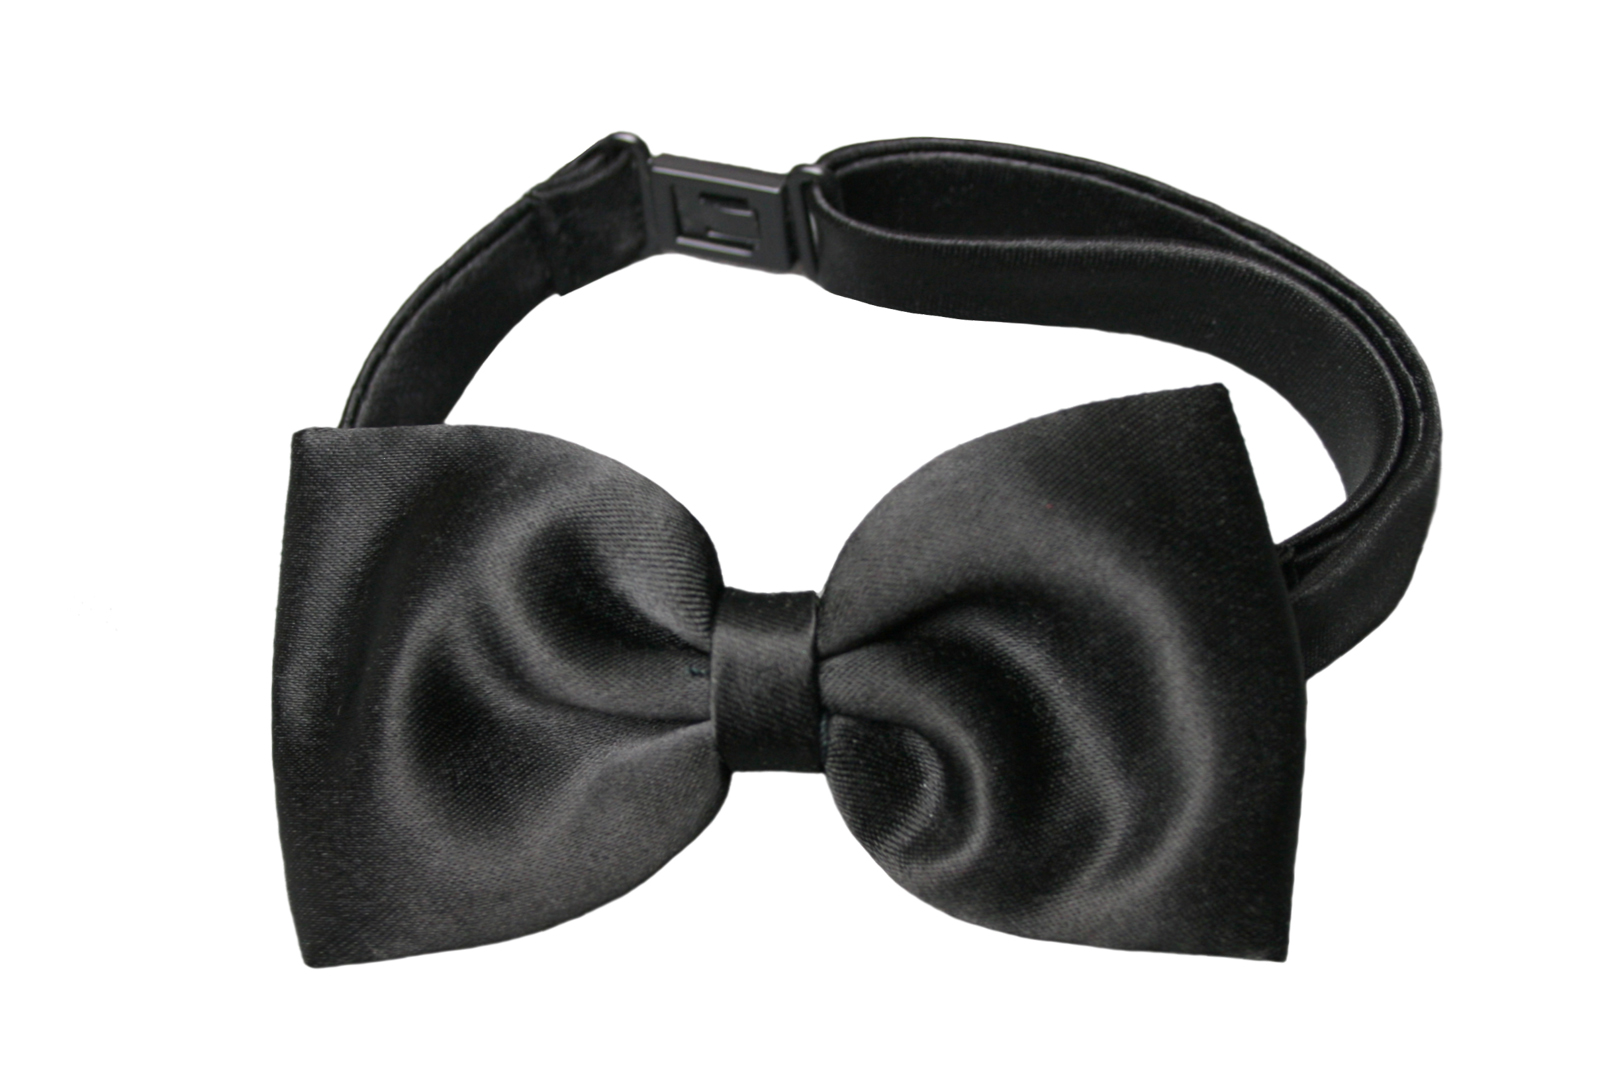 Leadertux New Infant Baby Boy Wedding Formal Party Holiday Black Bow Tie sz S-4T(0 months-4 yr)